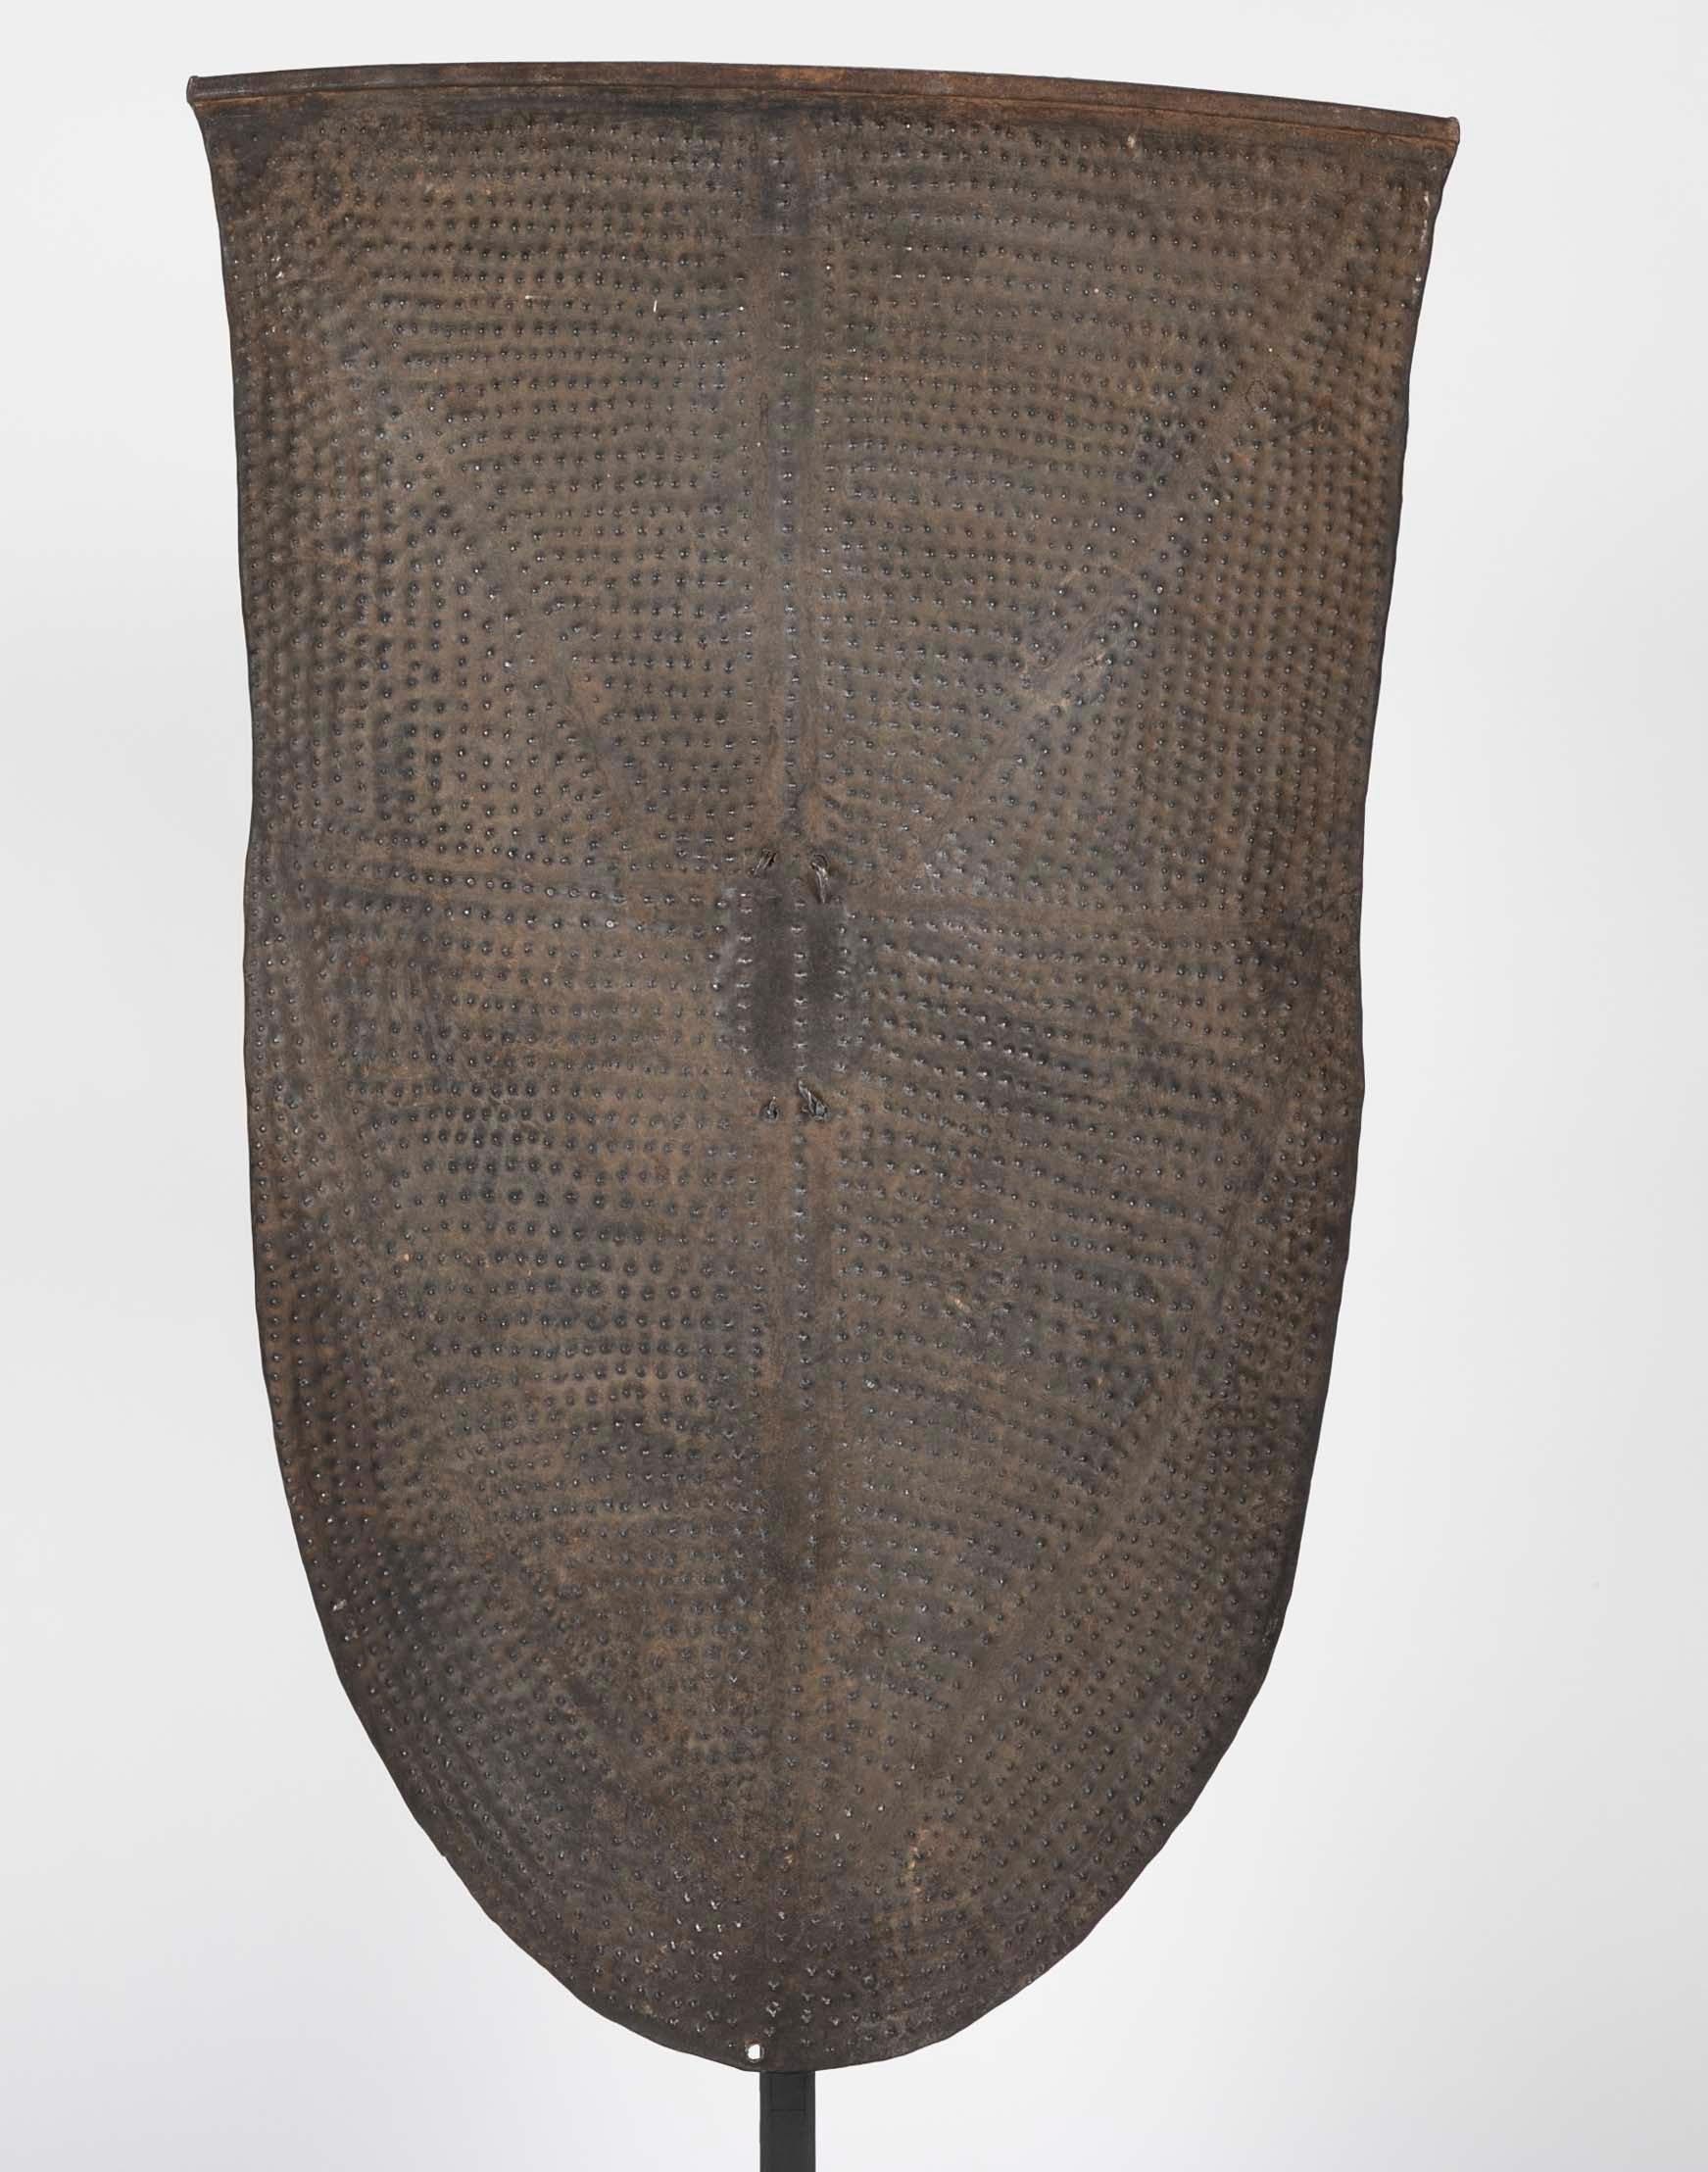 A rare repuse shield with natural fiber wraped handle from the Kirdi tribe Cameroon. Now on a patinated Bronze Stand. 

For a similar example please see- Benitez-Johannot, Purissima and Jean Paul Barbier, Shields: Africa, Southeast Asia and